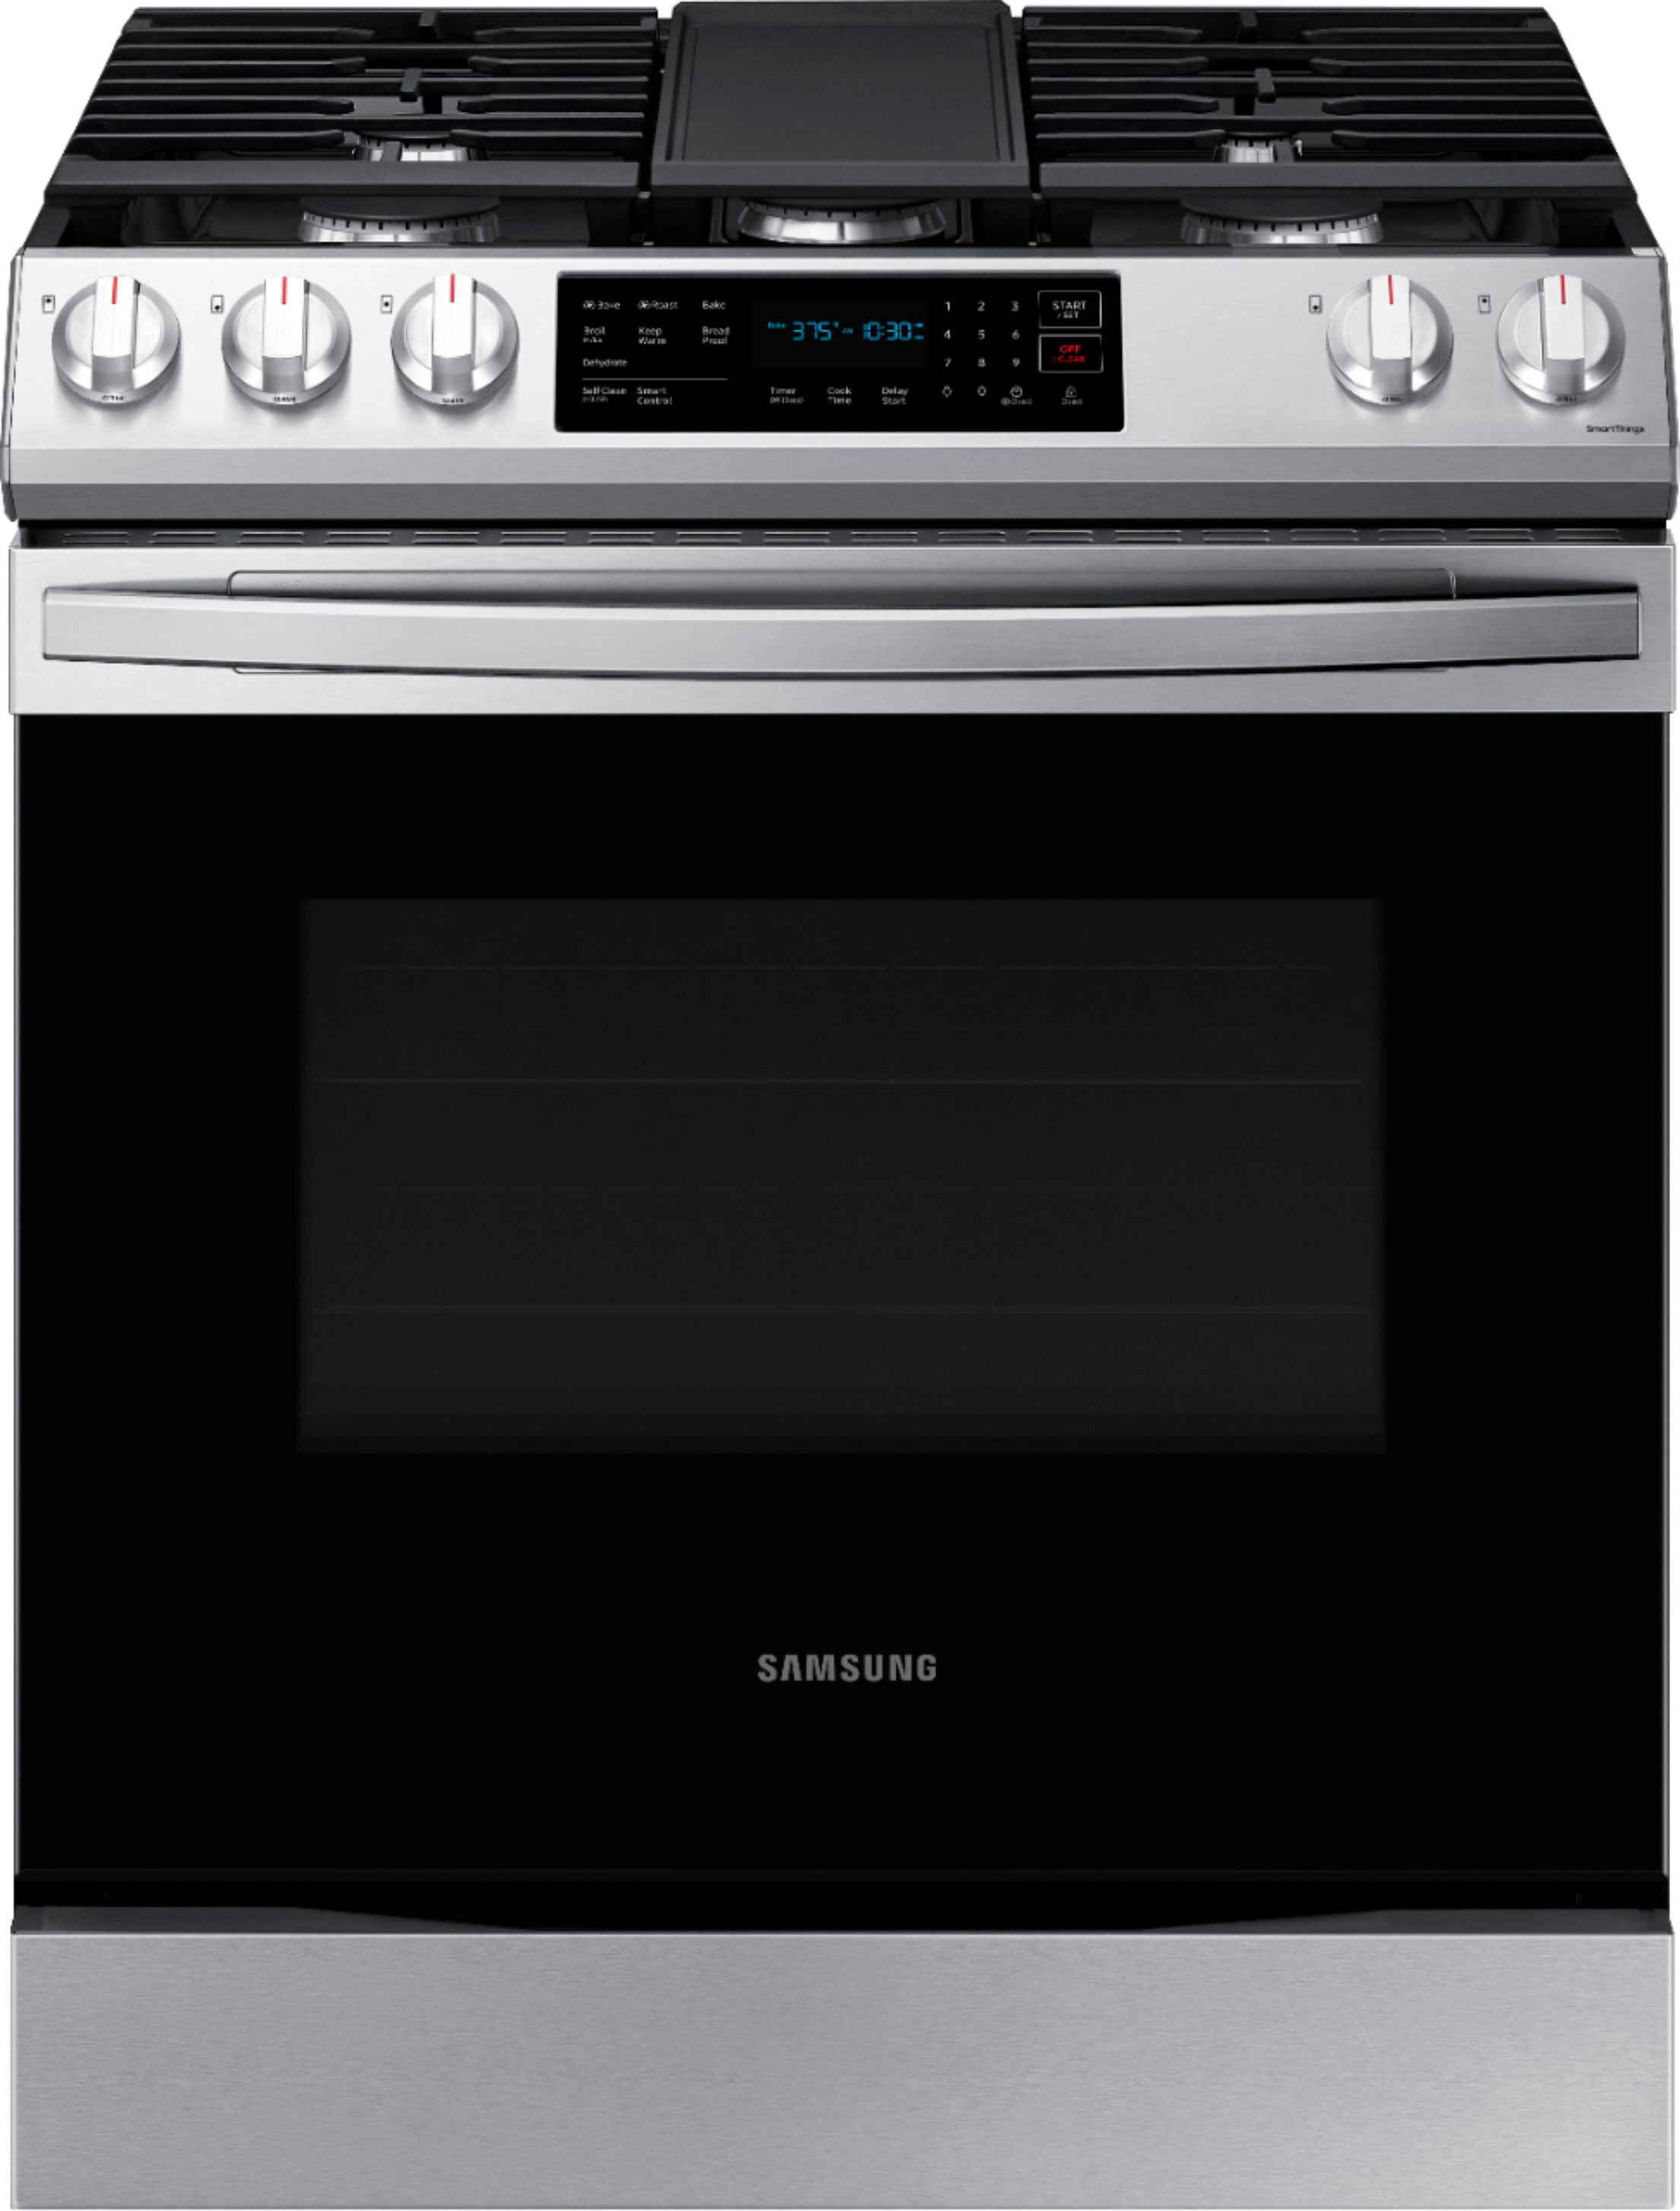 Samsung – 6.0 cu. ft. Front Control Slide-In Gas Range with Convection & Wi-Fi – Fingerprint Resistant Stainless Steel